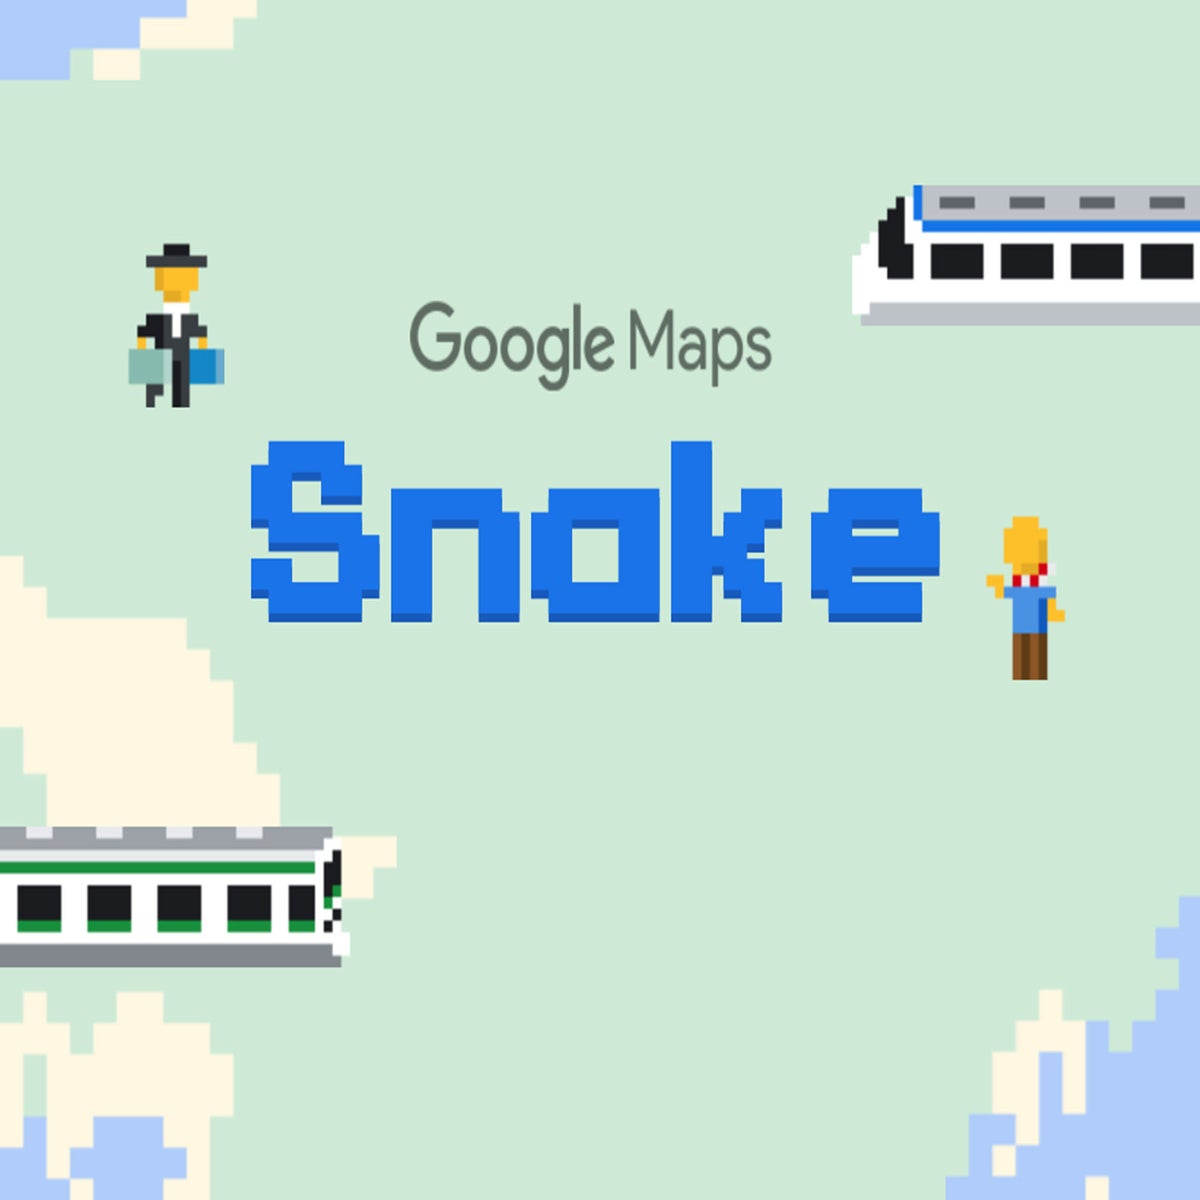 Google puts classic Snake game into Maps for April Fools' Day